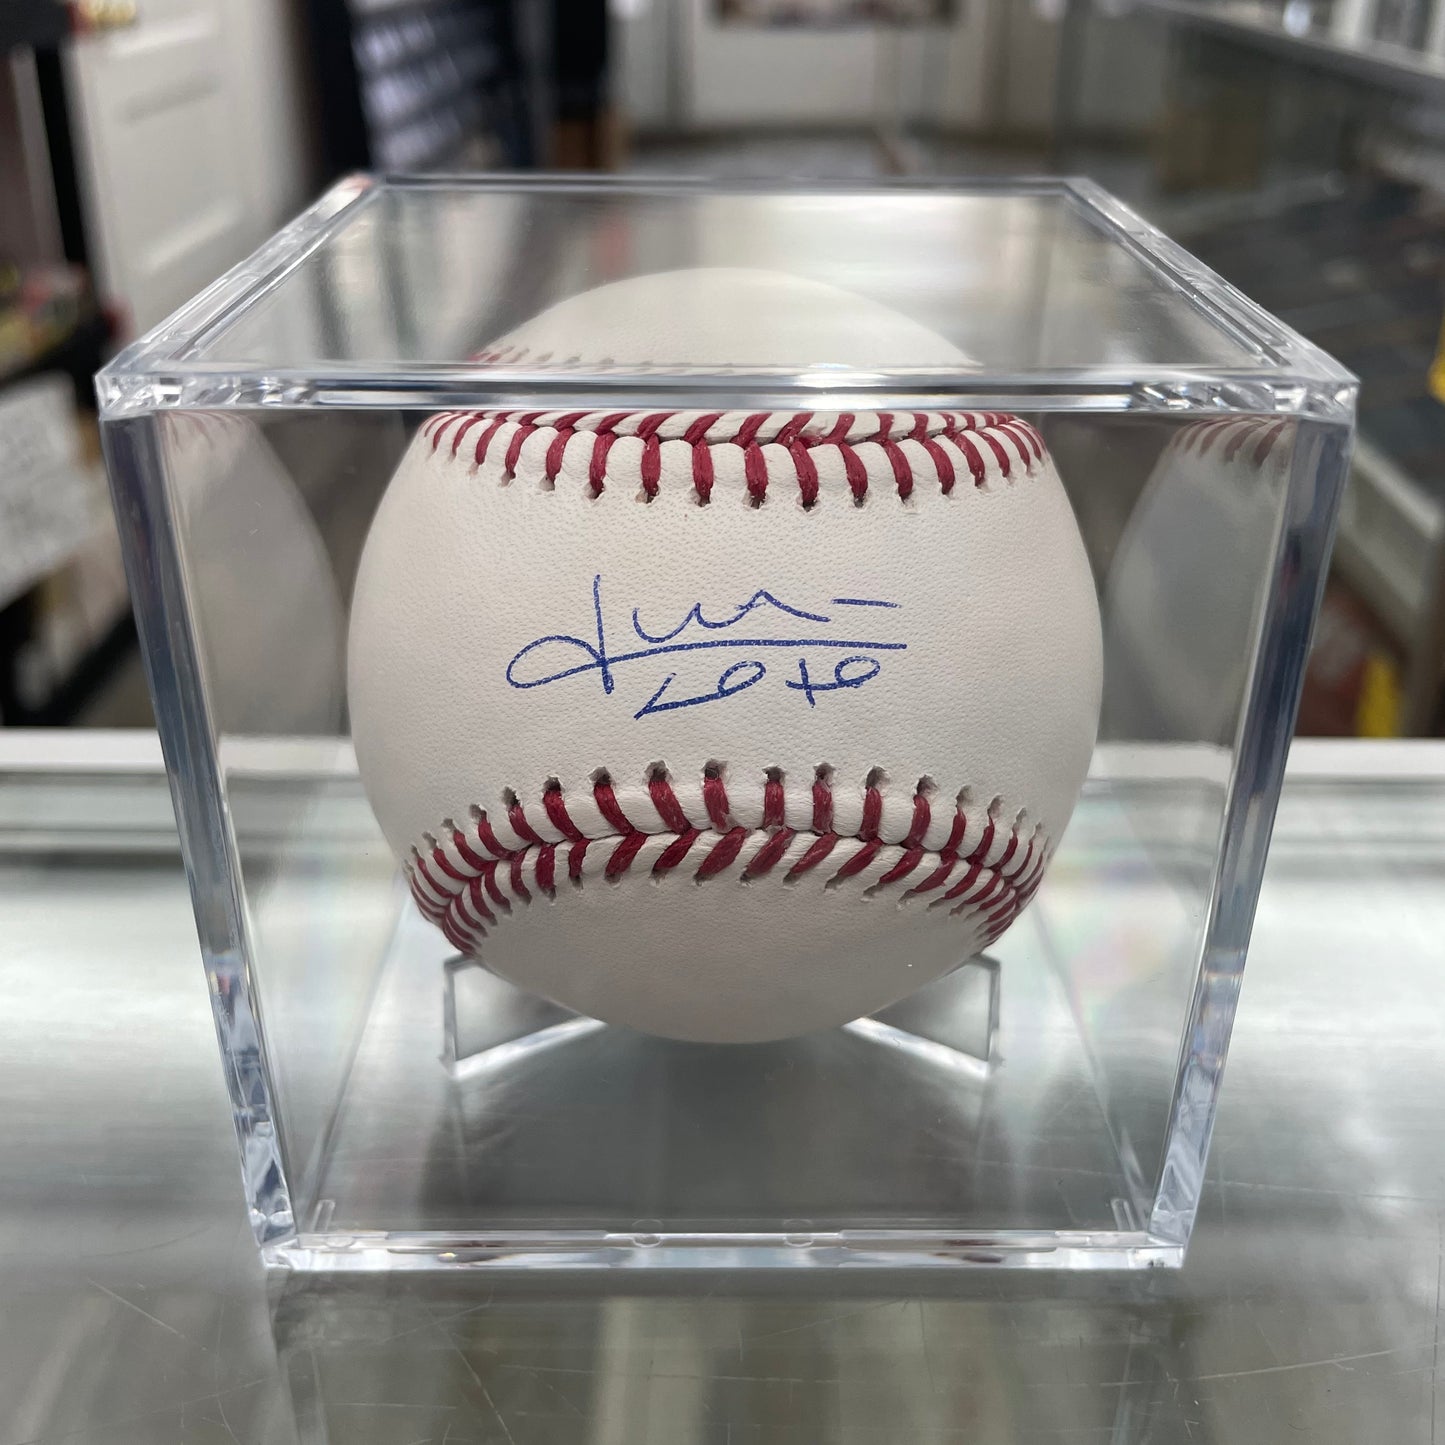 FATHER'S DAY SPECIAL- Juan Soto Yankees Signed Auto Baseball JSA Auth  (HOT)